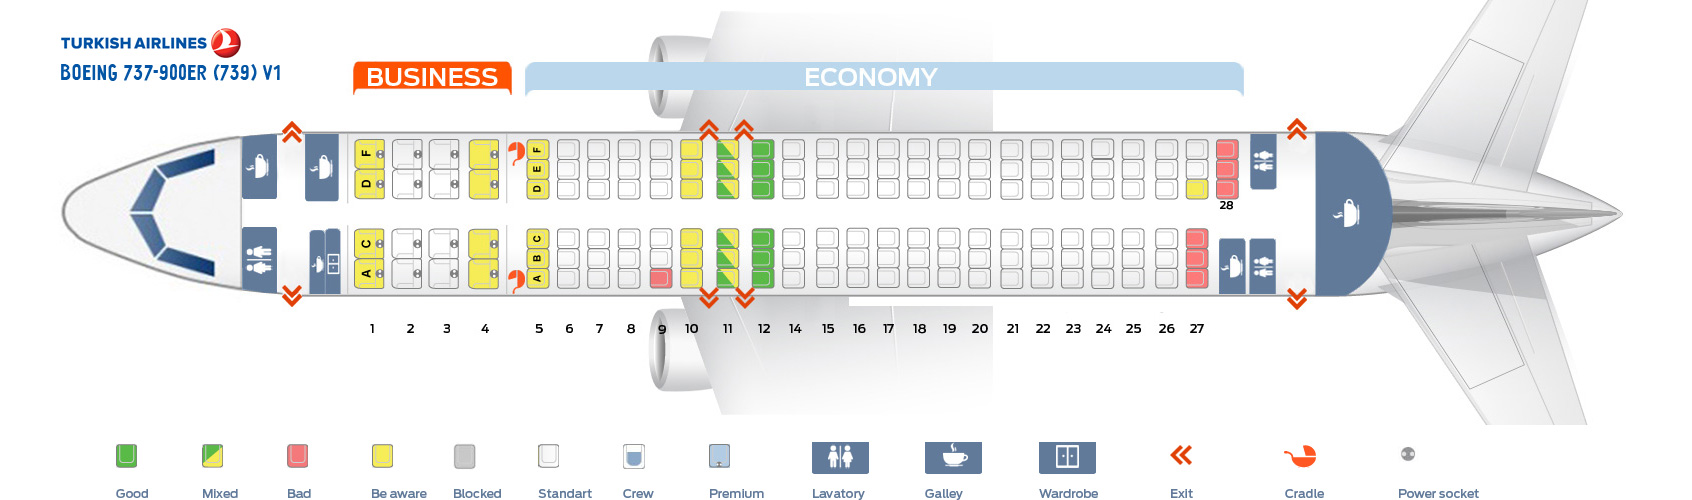 Seat Map Boeing 737 900 Turkish Airlines Best Seats In The